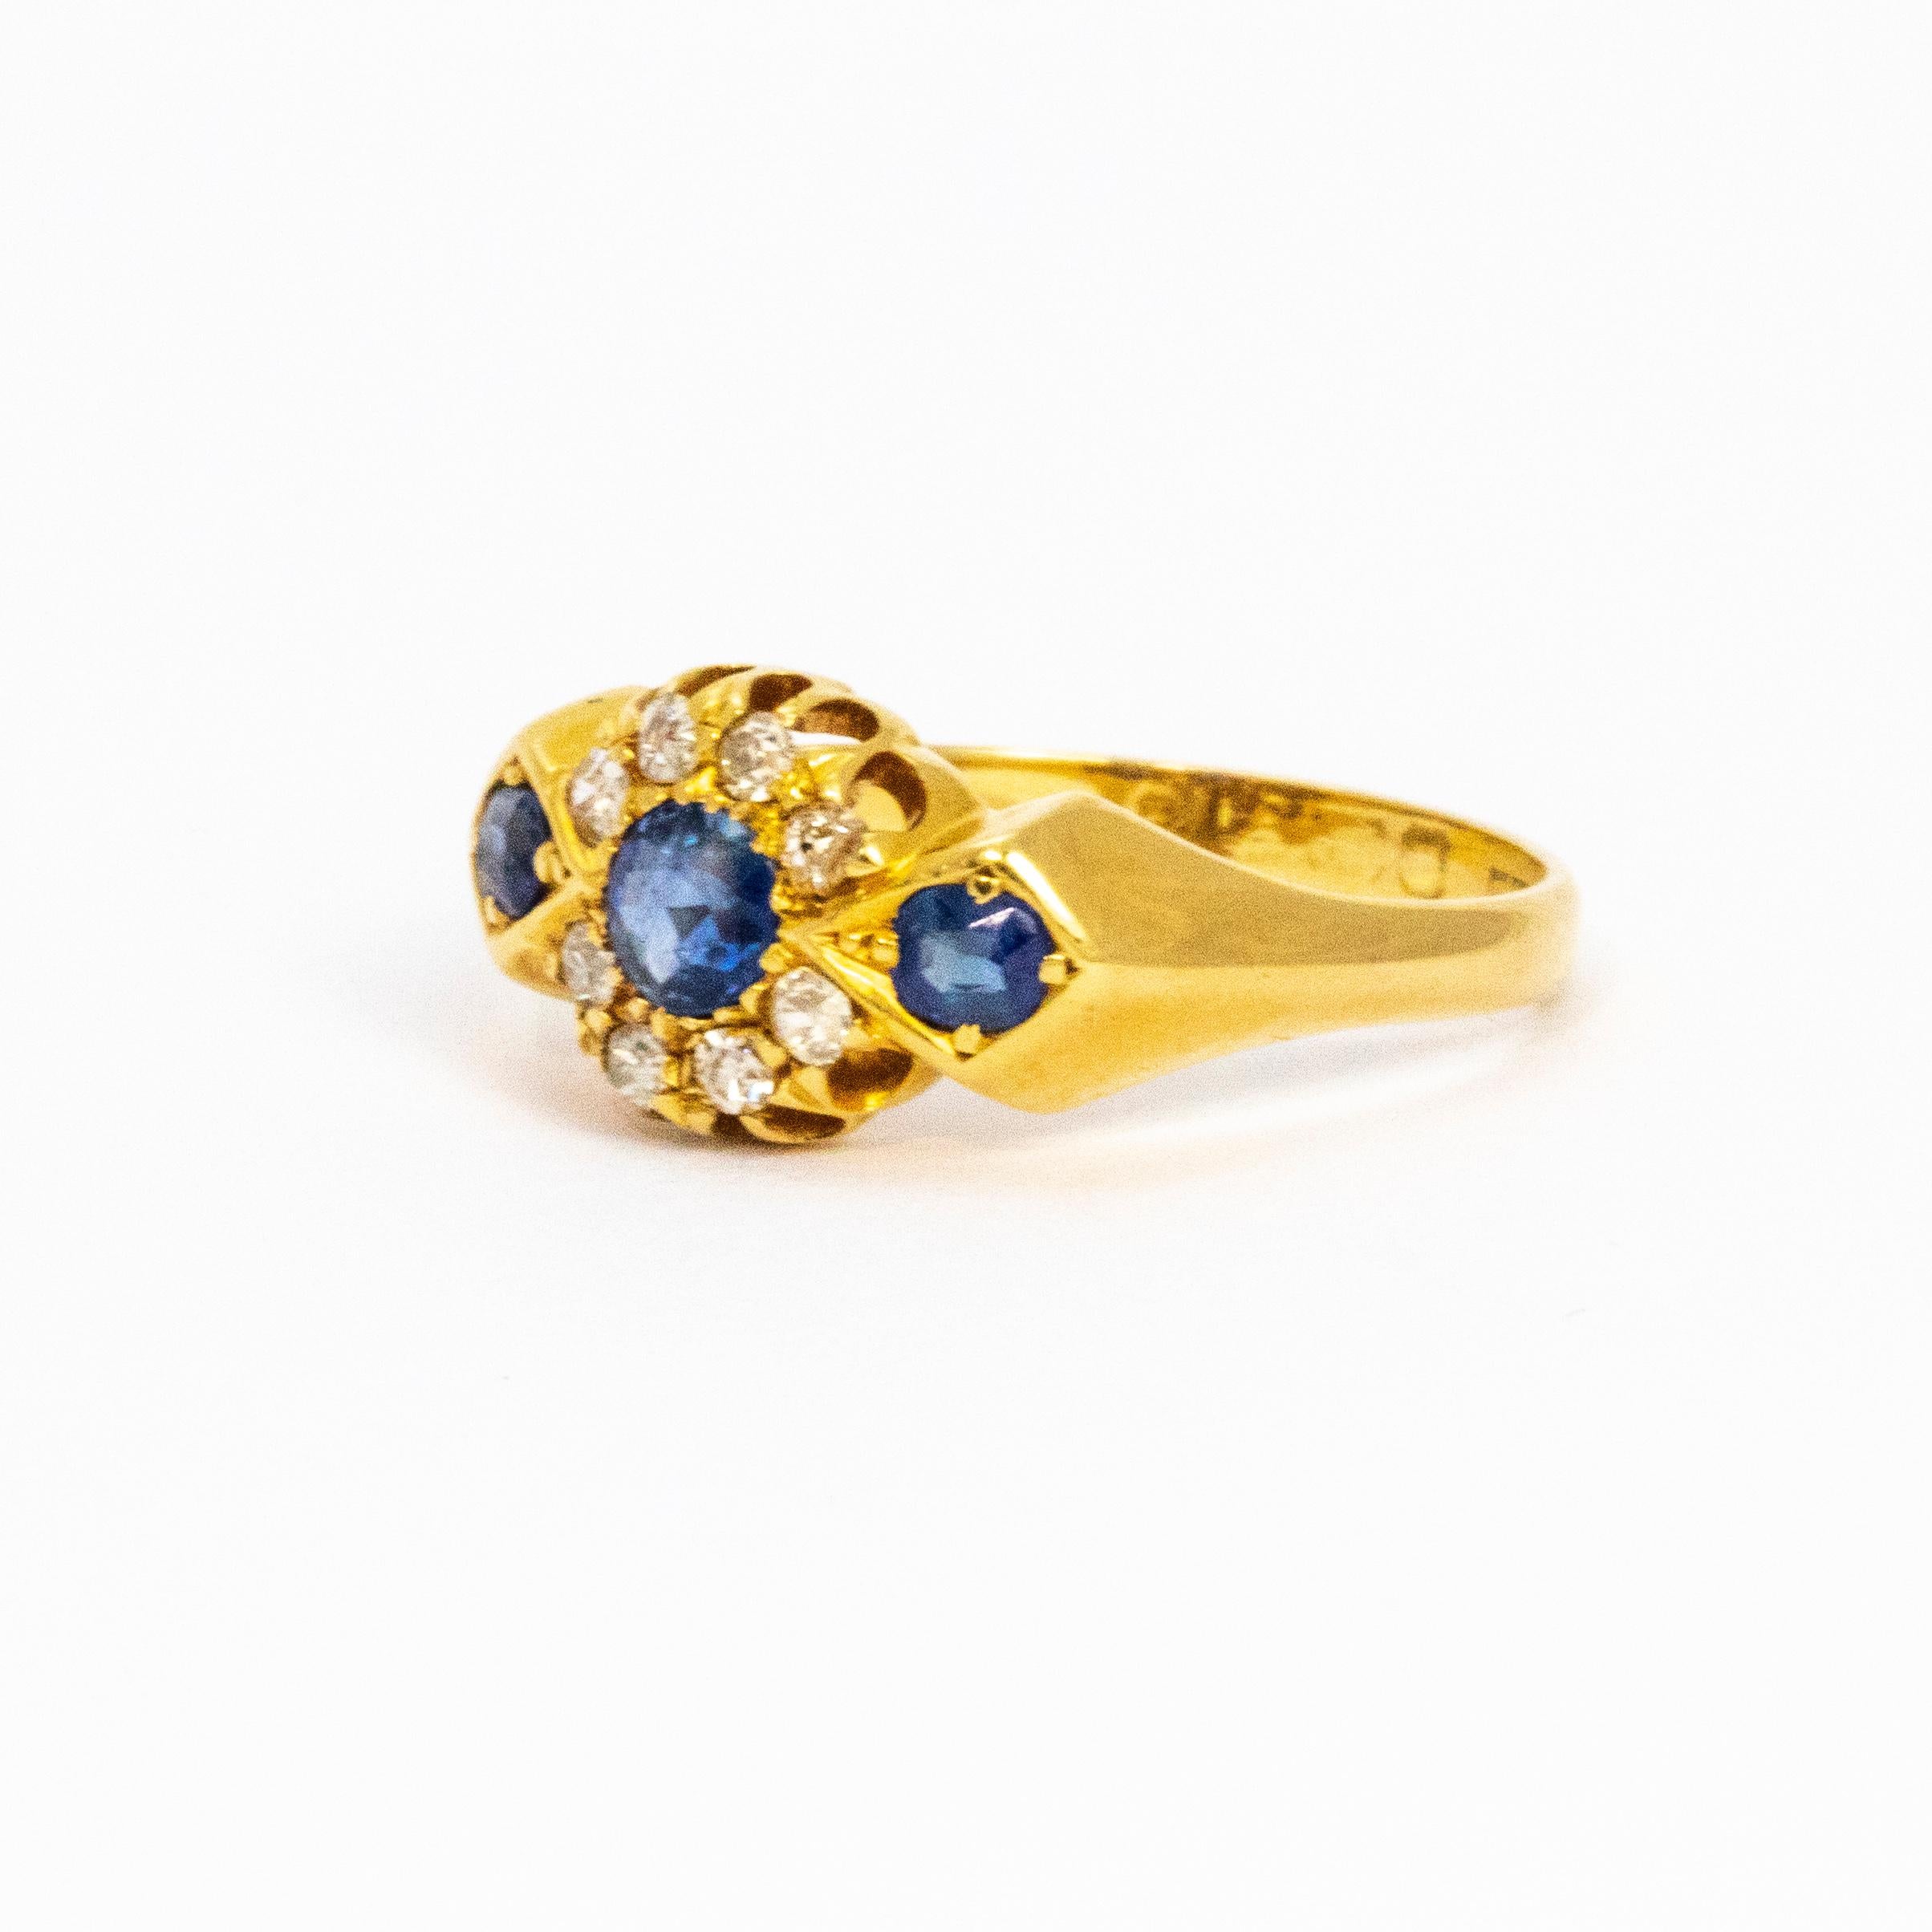 Shiny and sparkling Edwardian 18ct yellow gold ring set with soft cornflower blue Sapphires and diamonds.

Ring size: O or 7 1/4